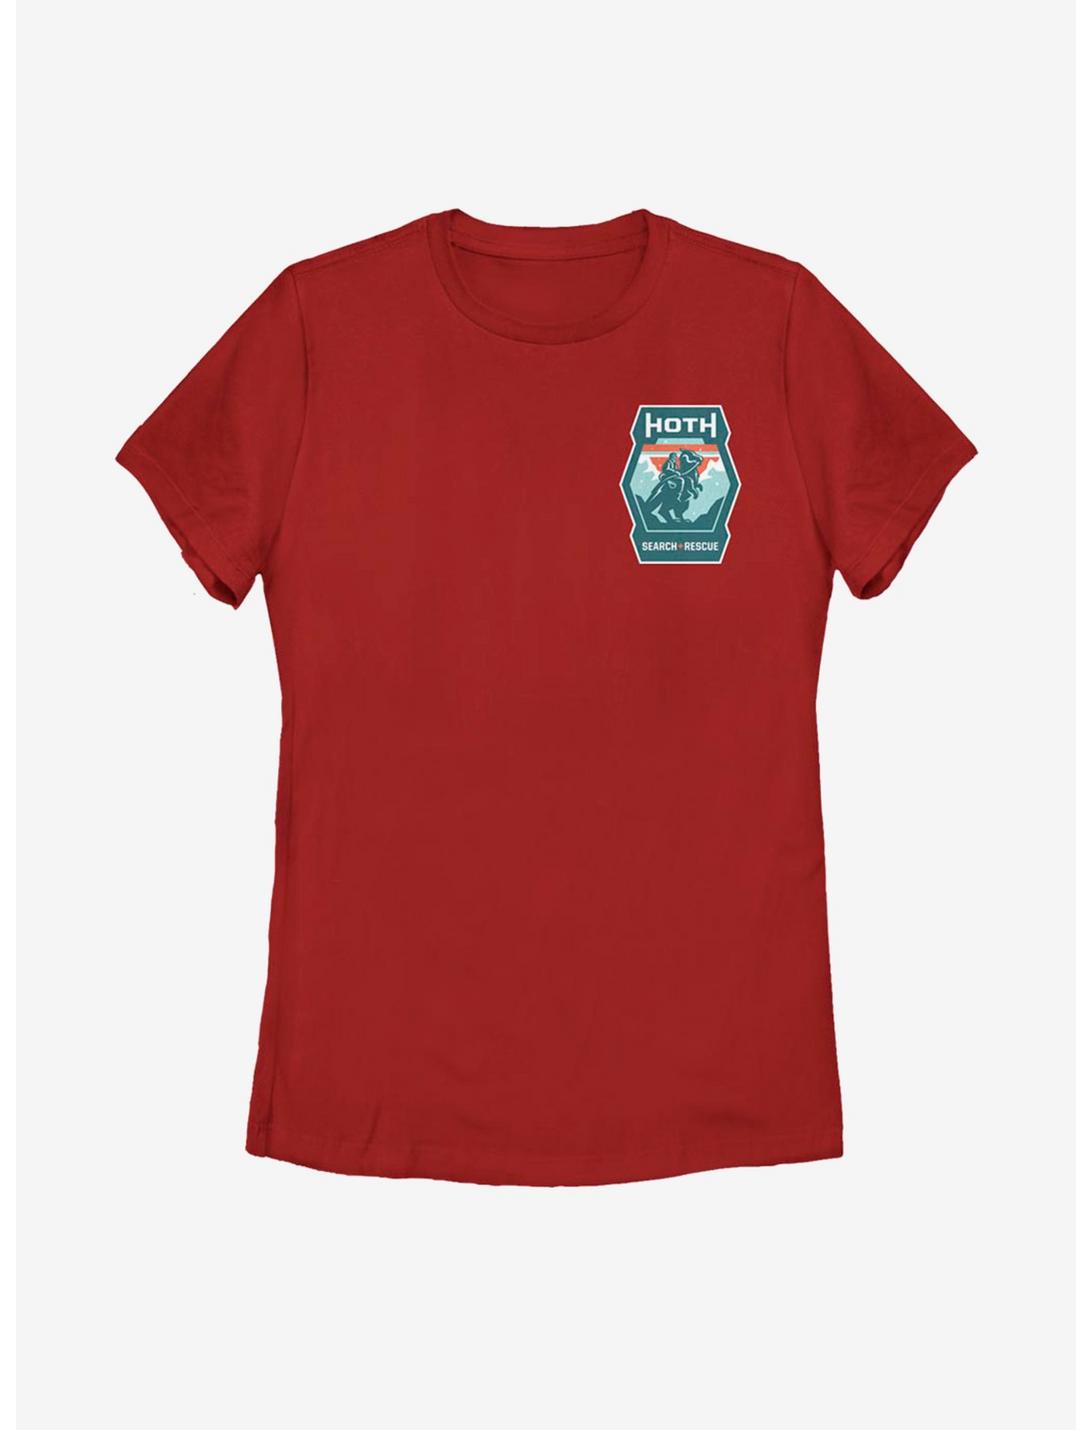 Star Wars Hoth Search And Rescue Womens T-Shirt, RED, hi-res